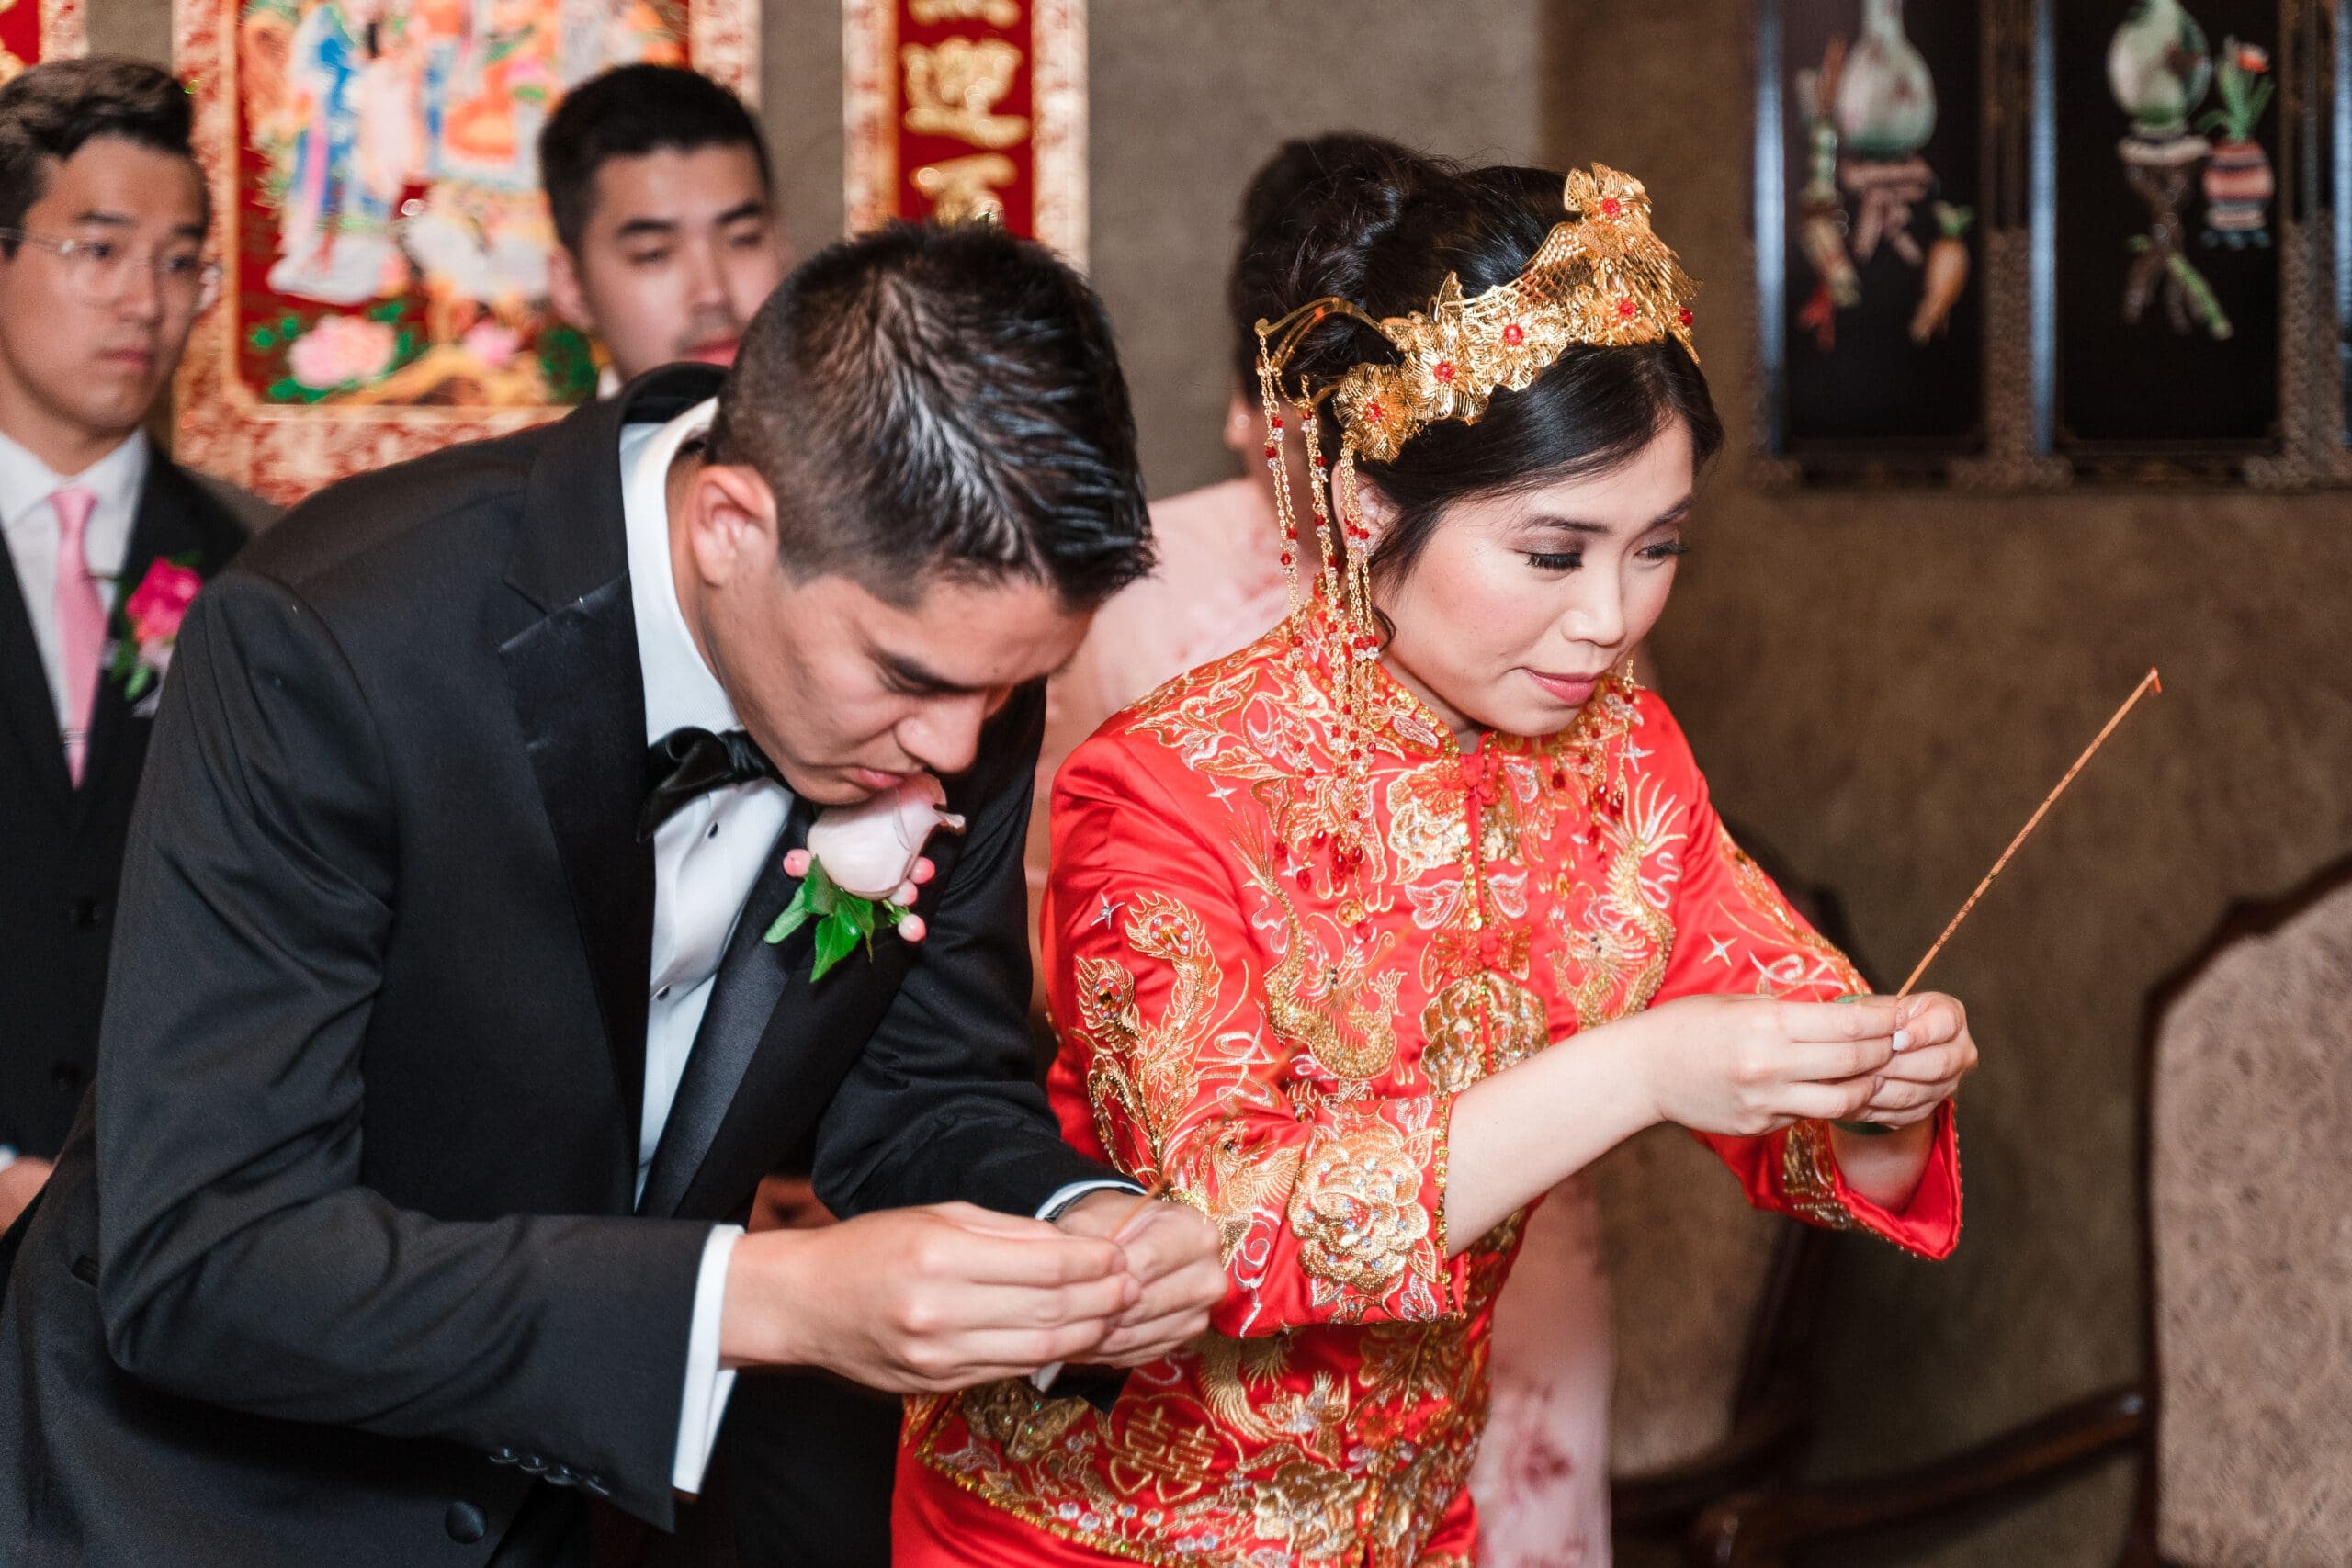 Couple bowing together at the altar in traditional Asian wedding attire